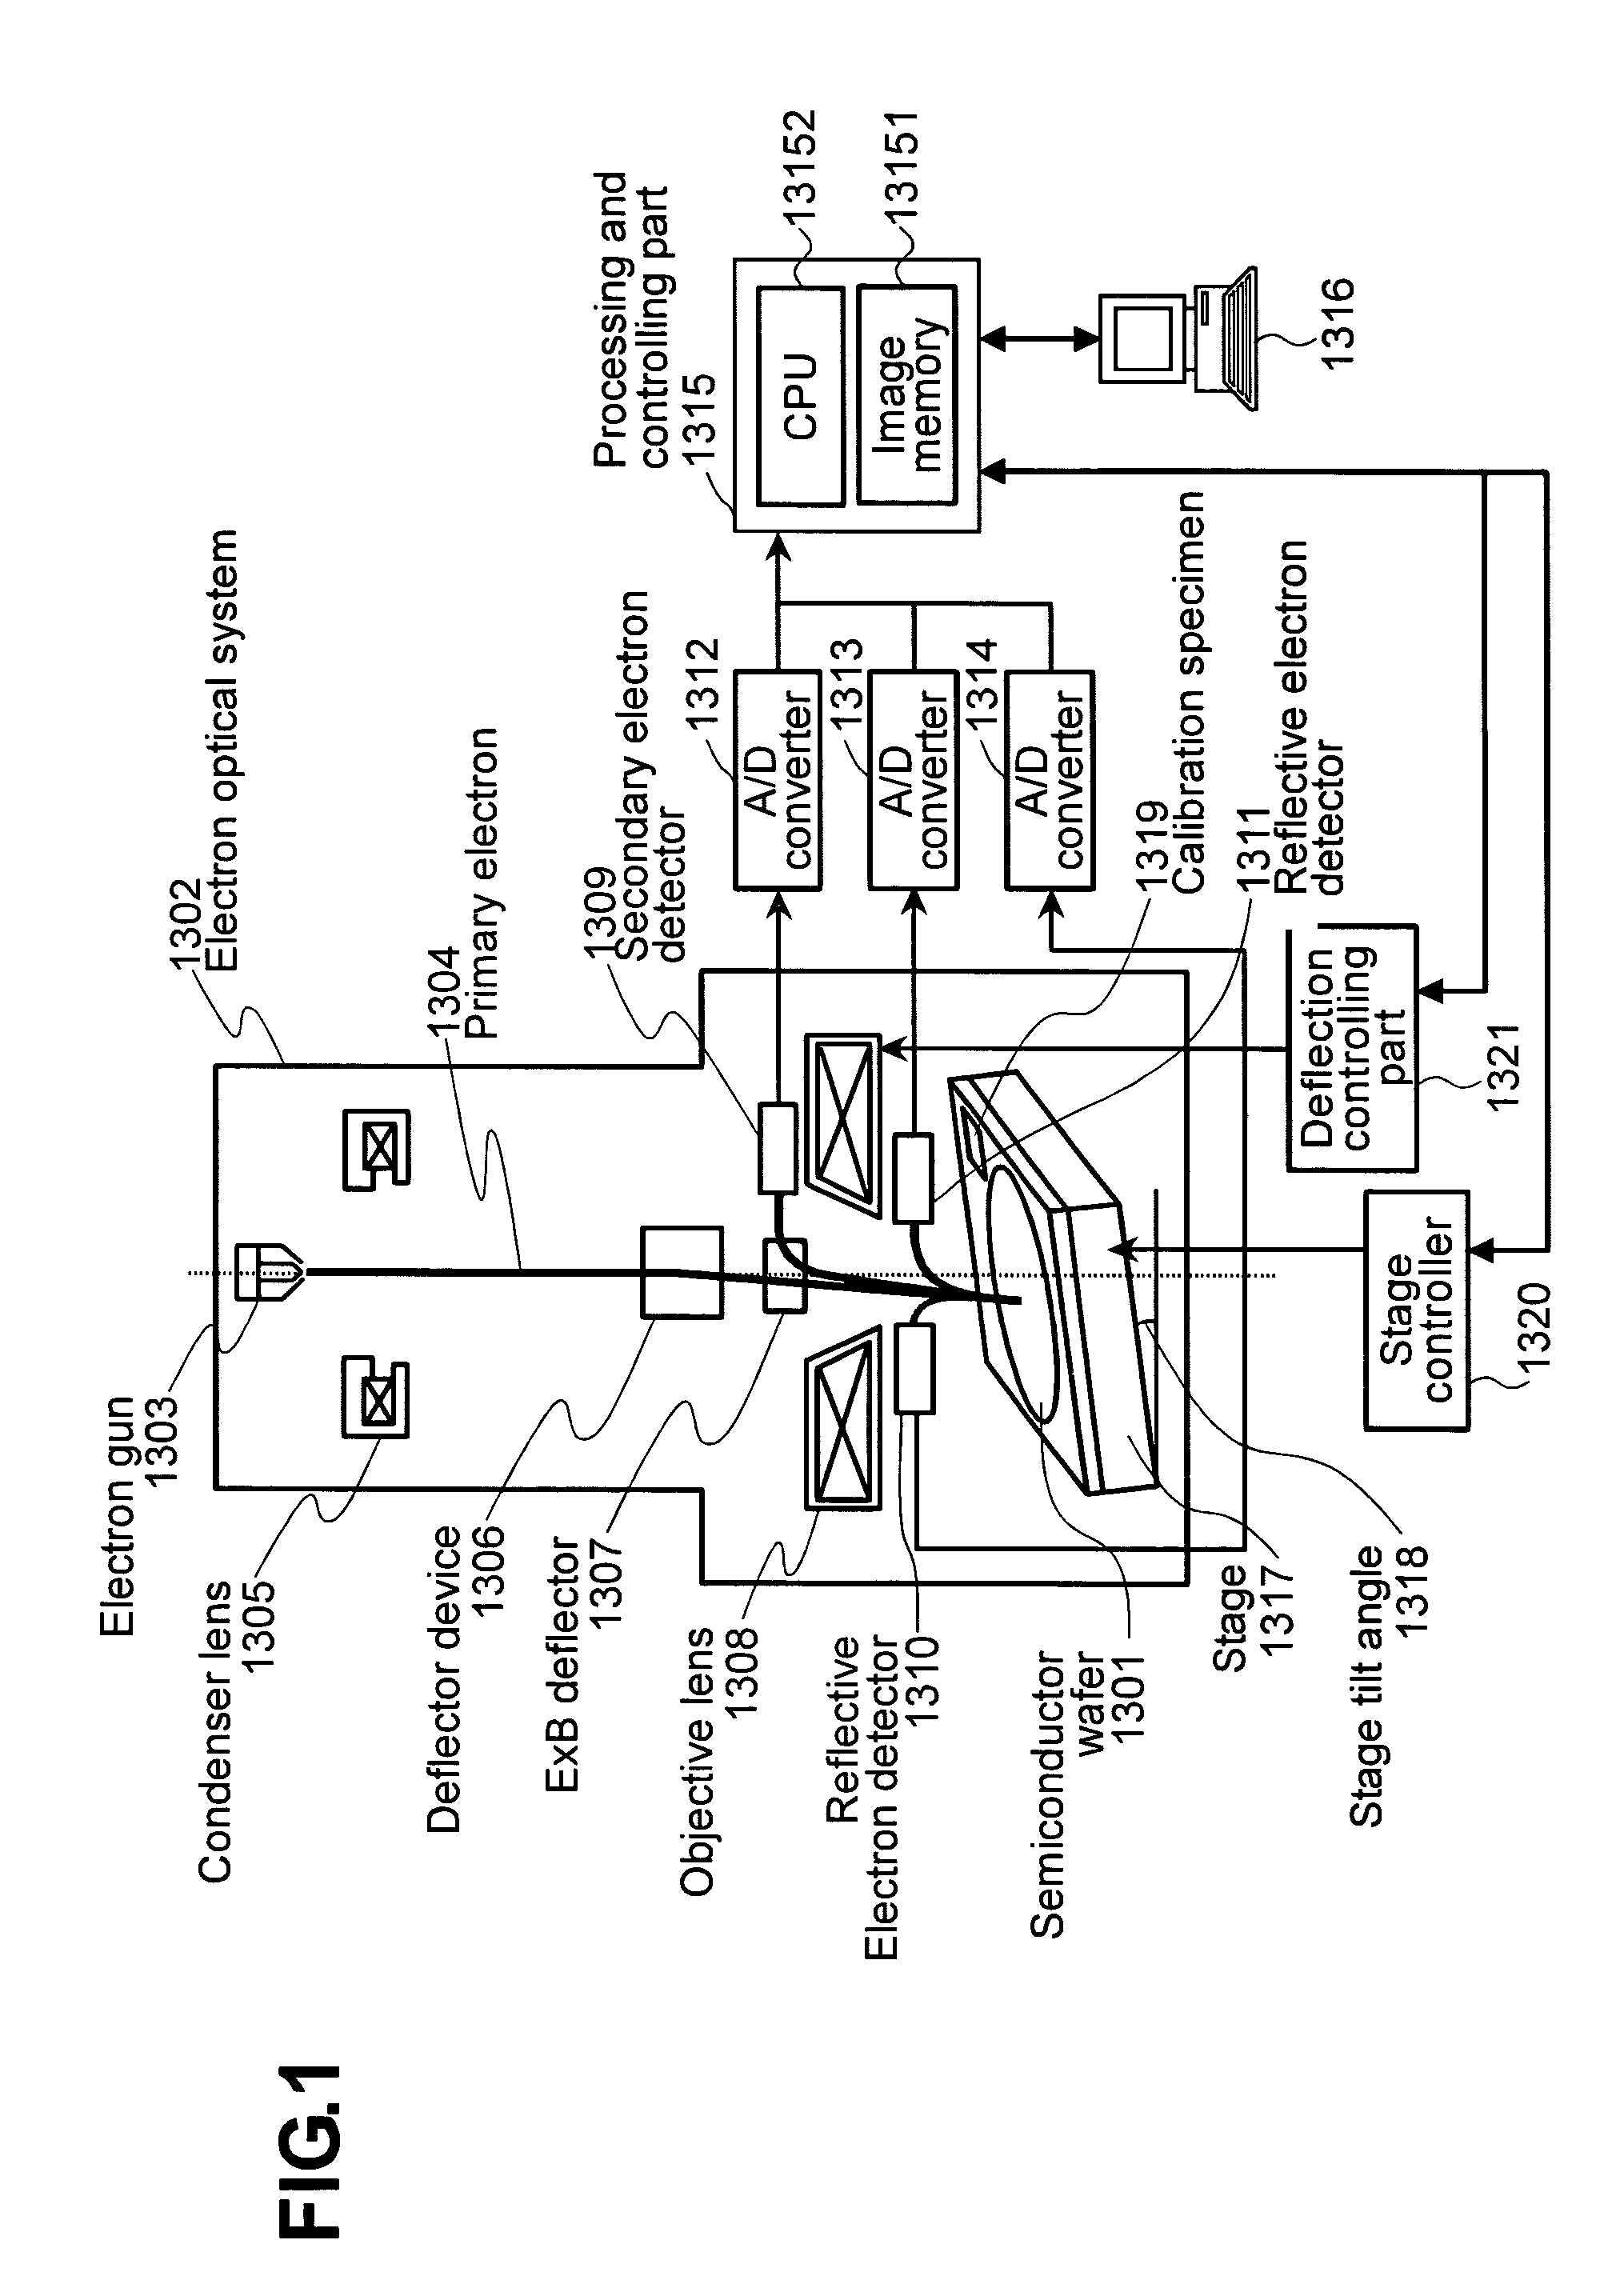 Method and apparatus for observing a specimen